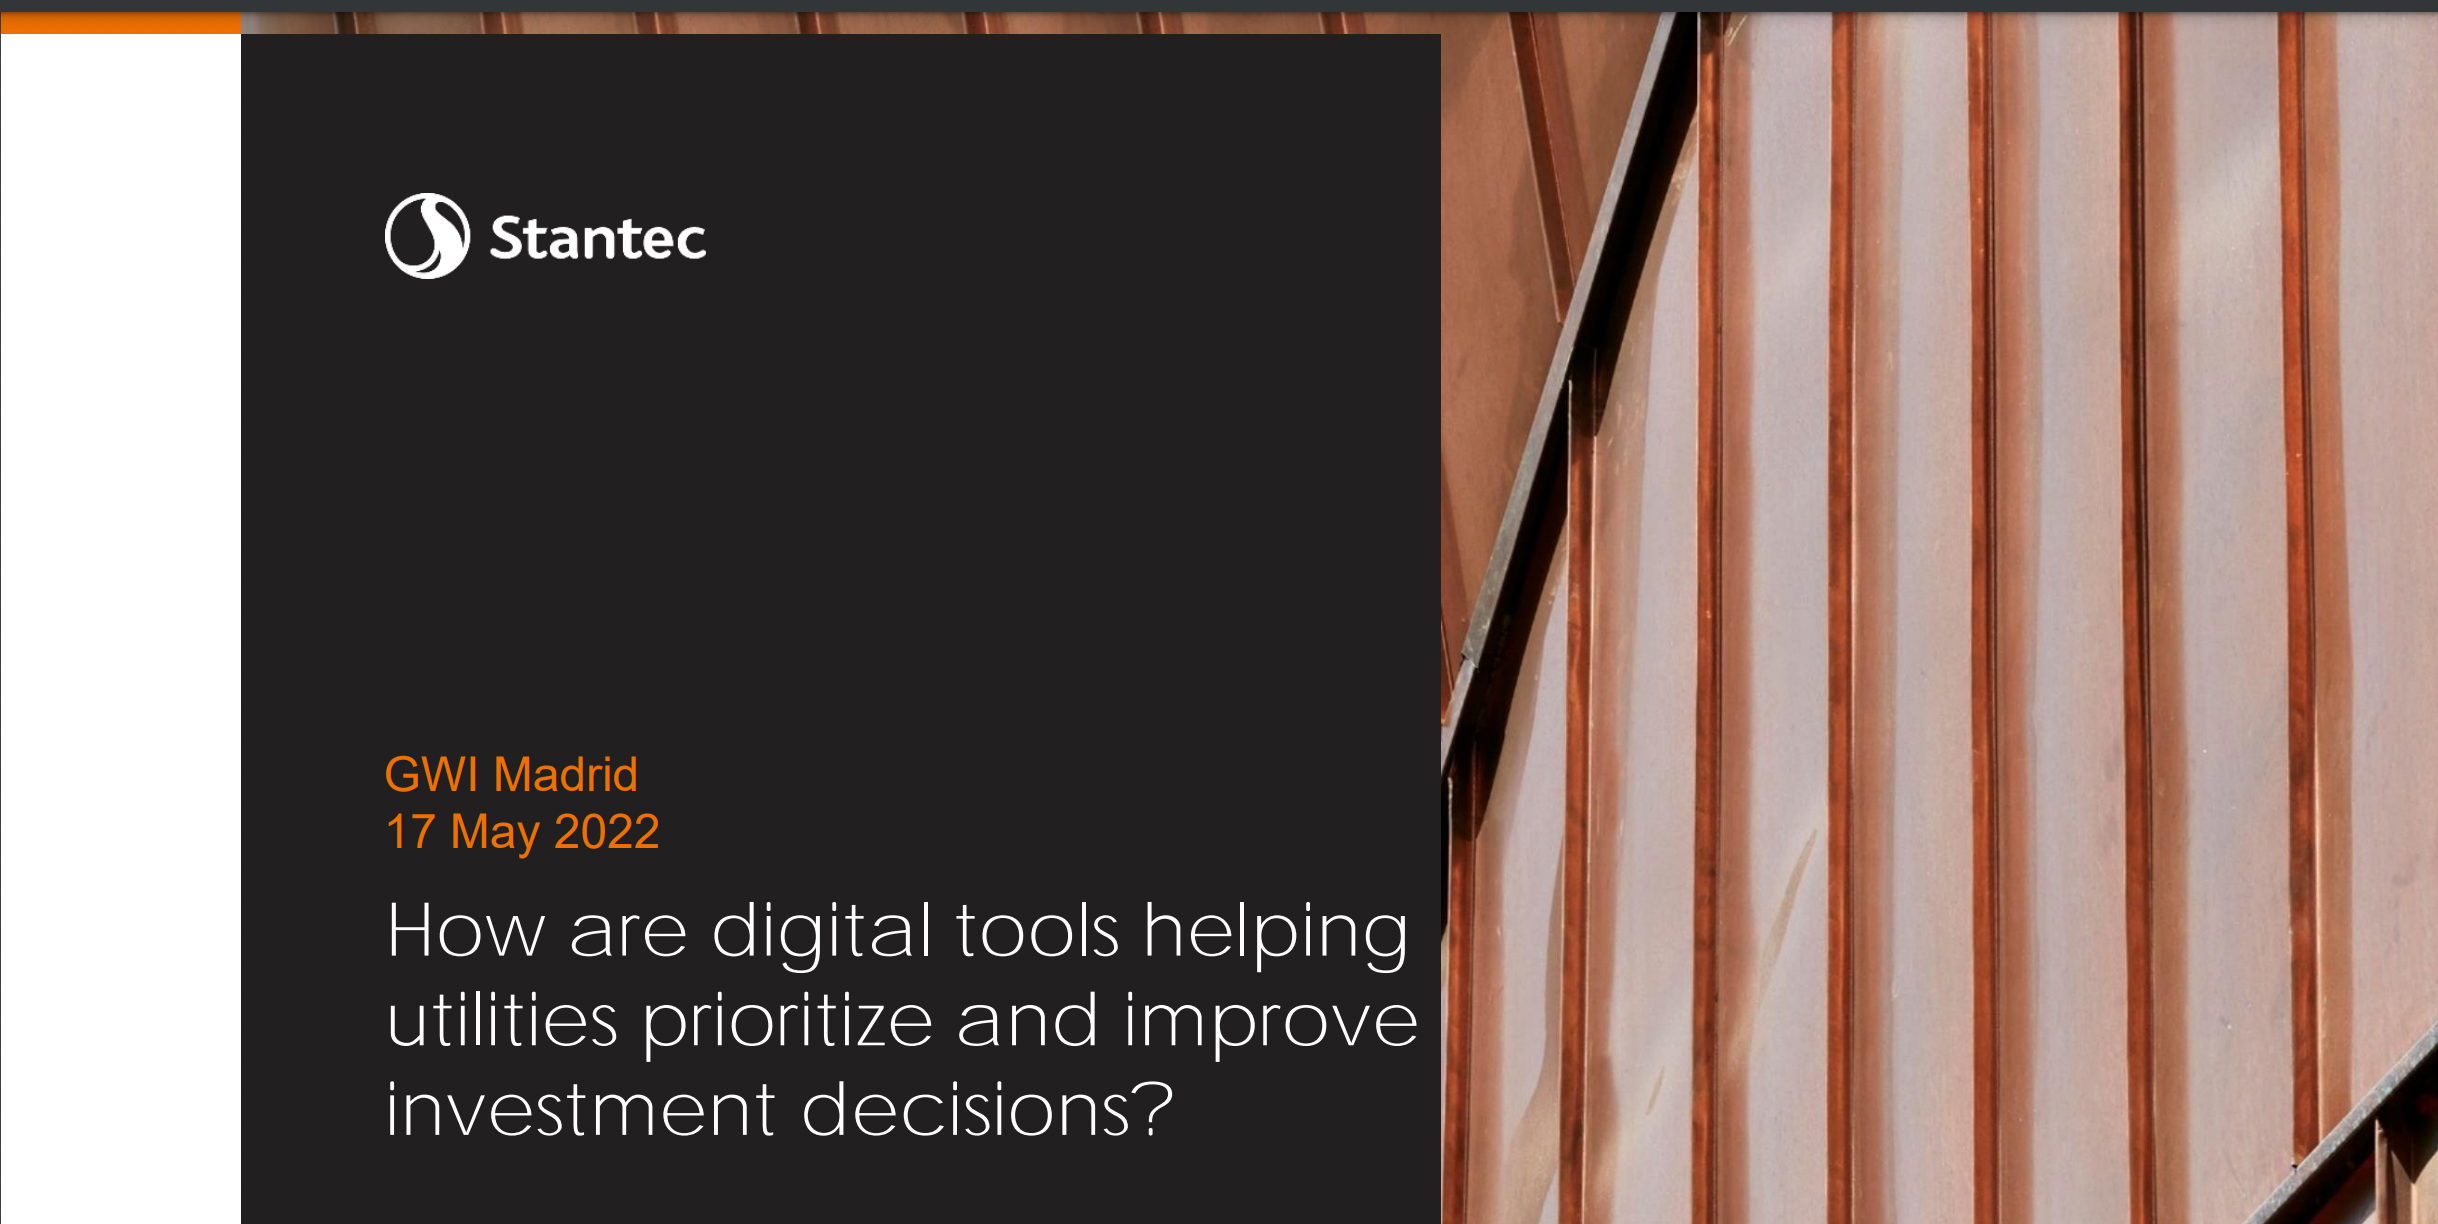 How are digital tools helping utilities prioritize and improve investment decisions?